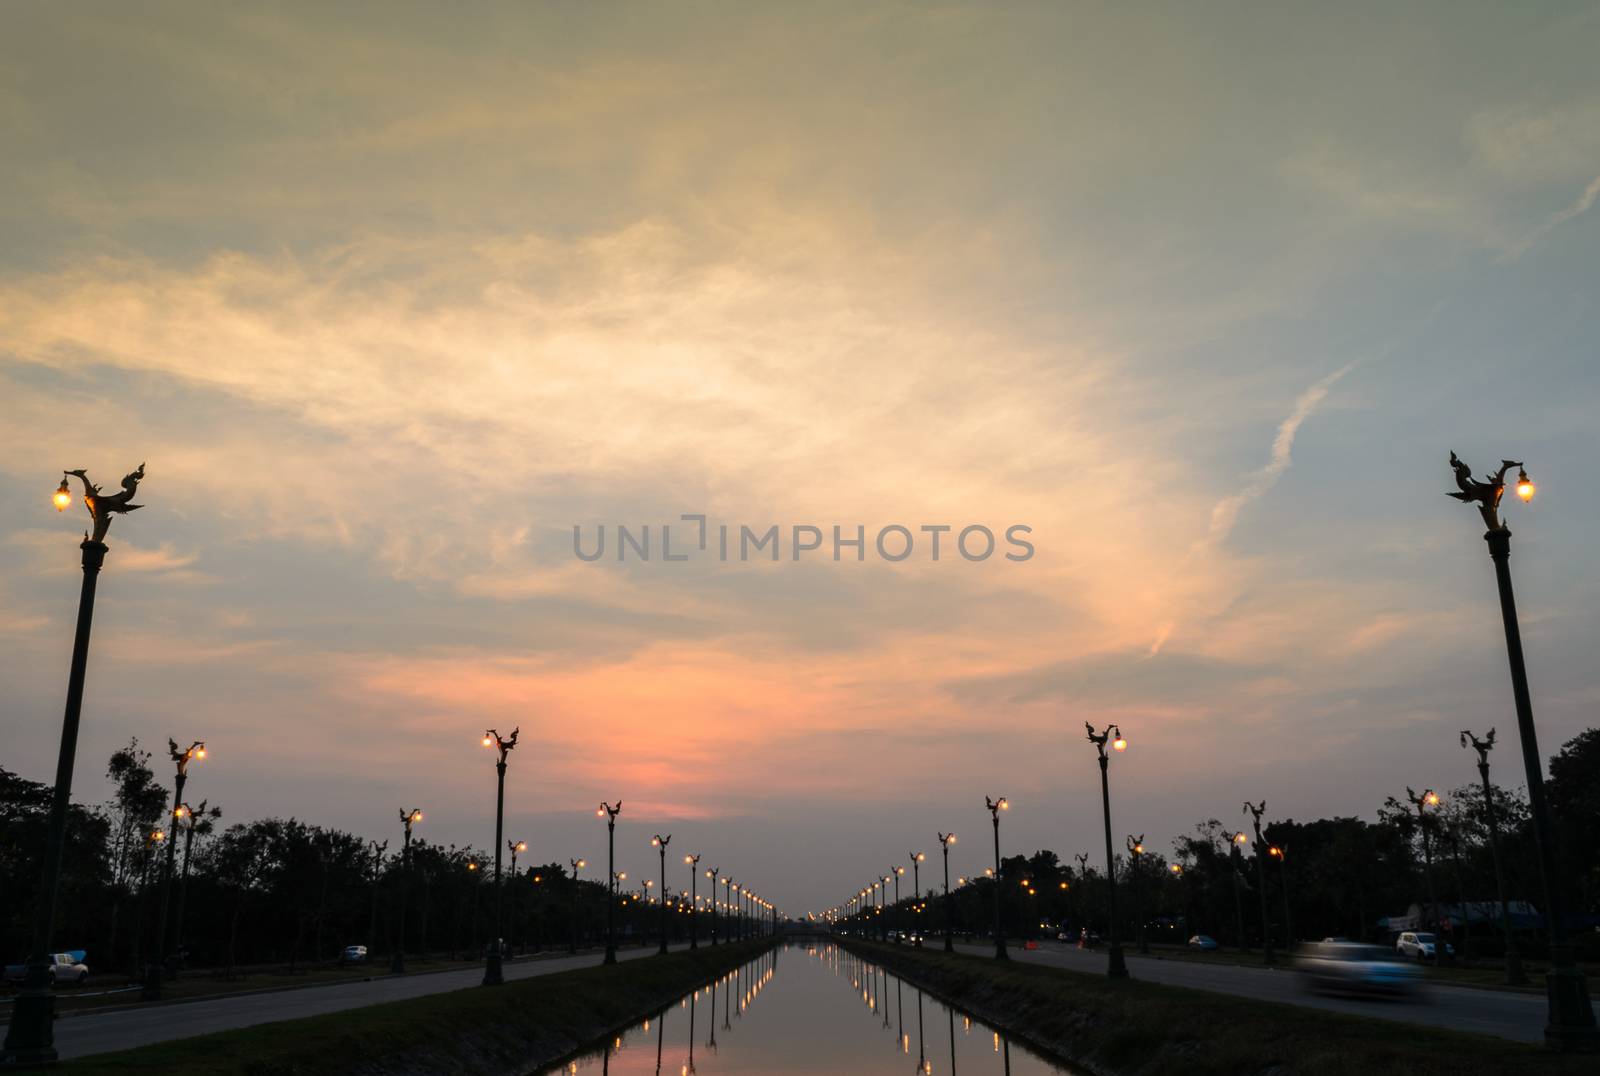 Sunset over a highway Utthayan Road and reflection on the river in Bangkok Thailand.